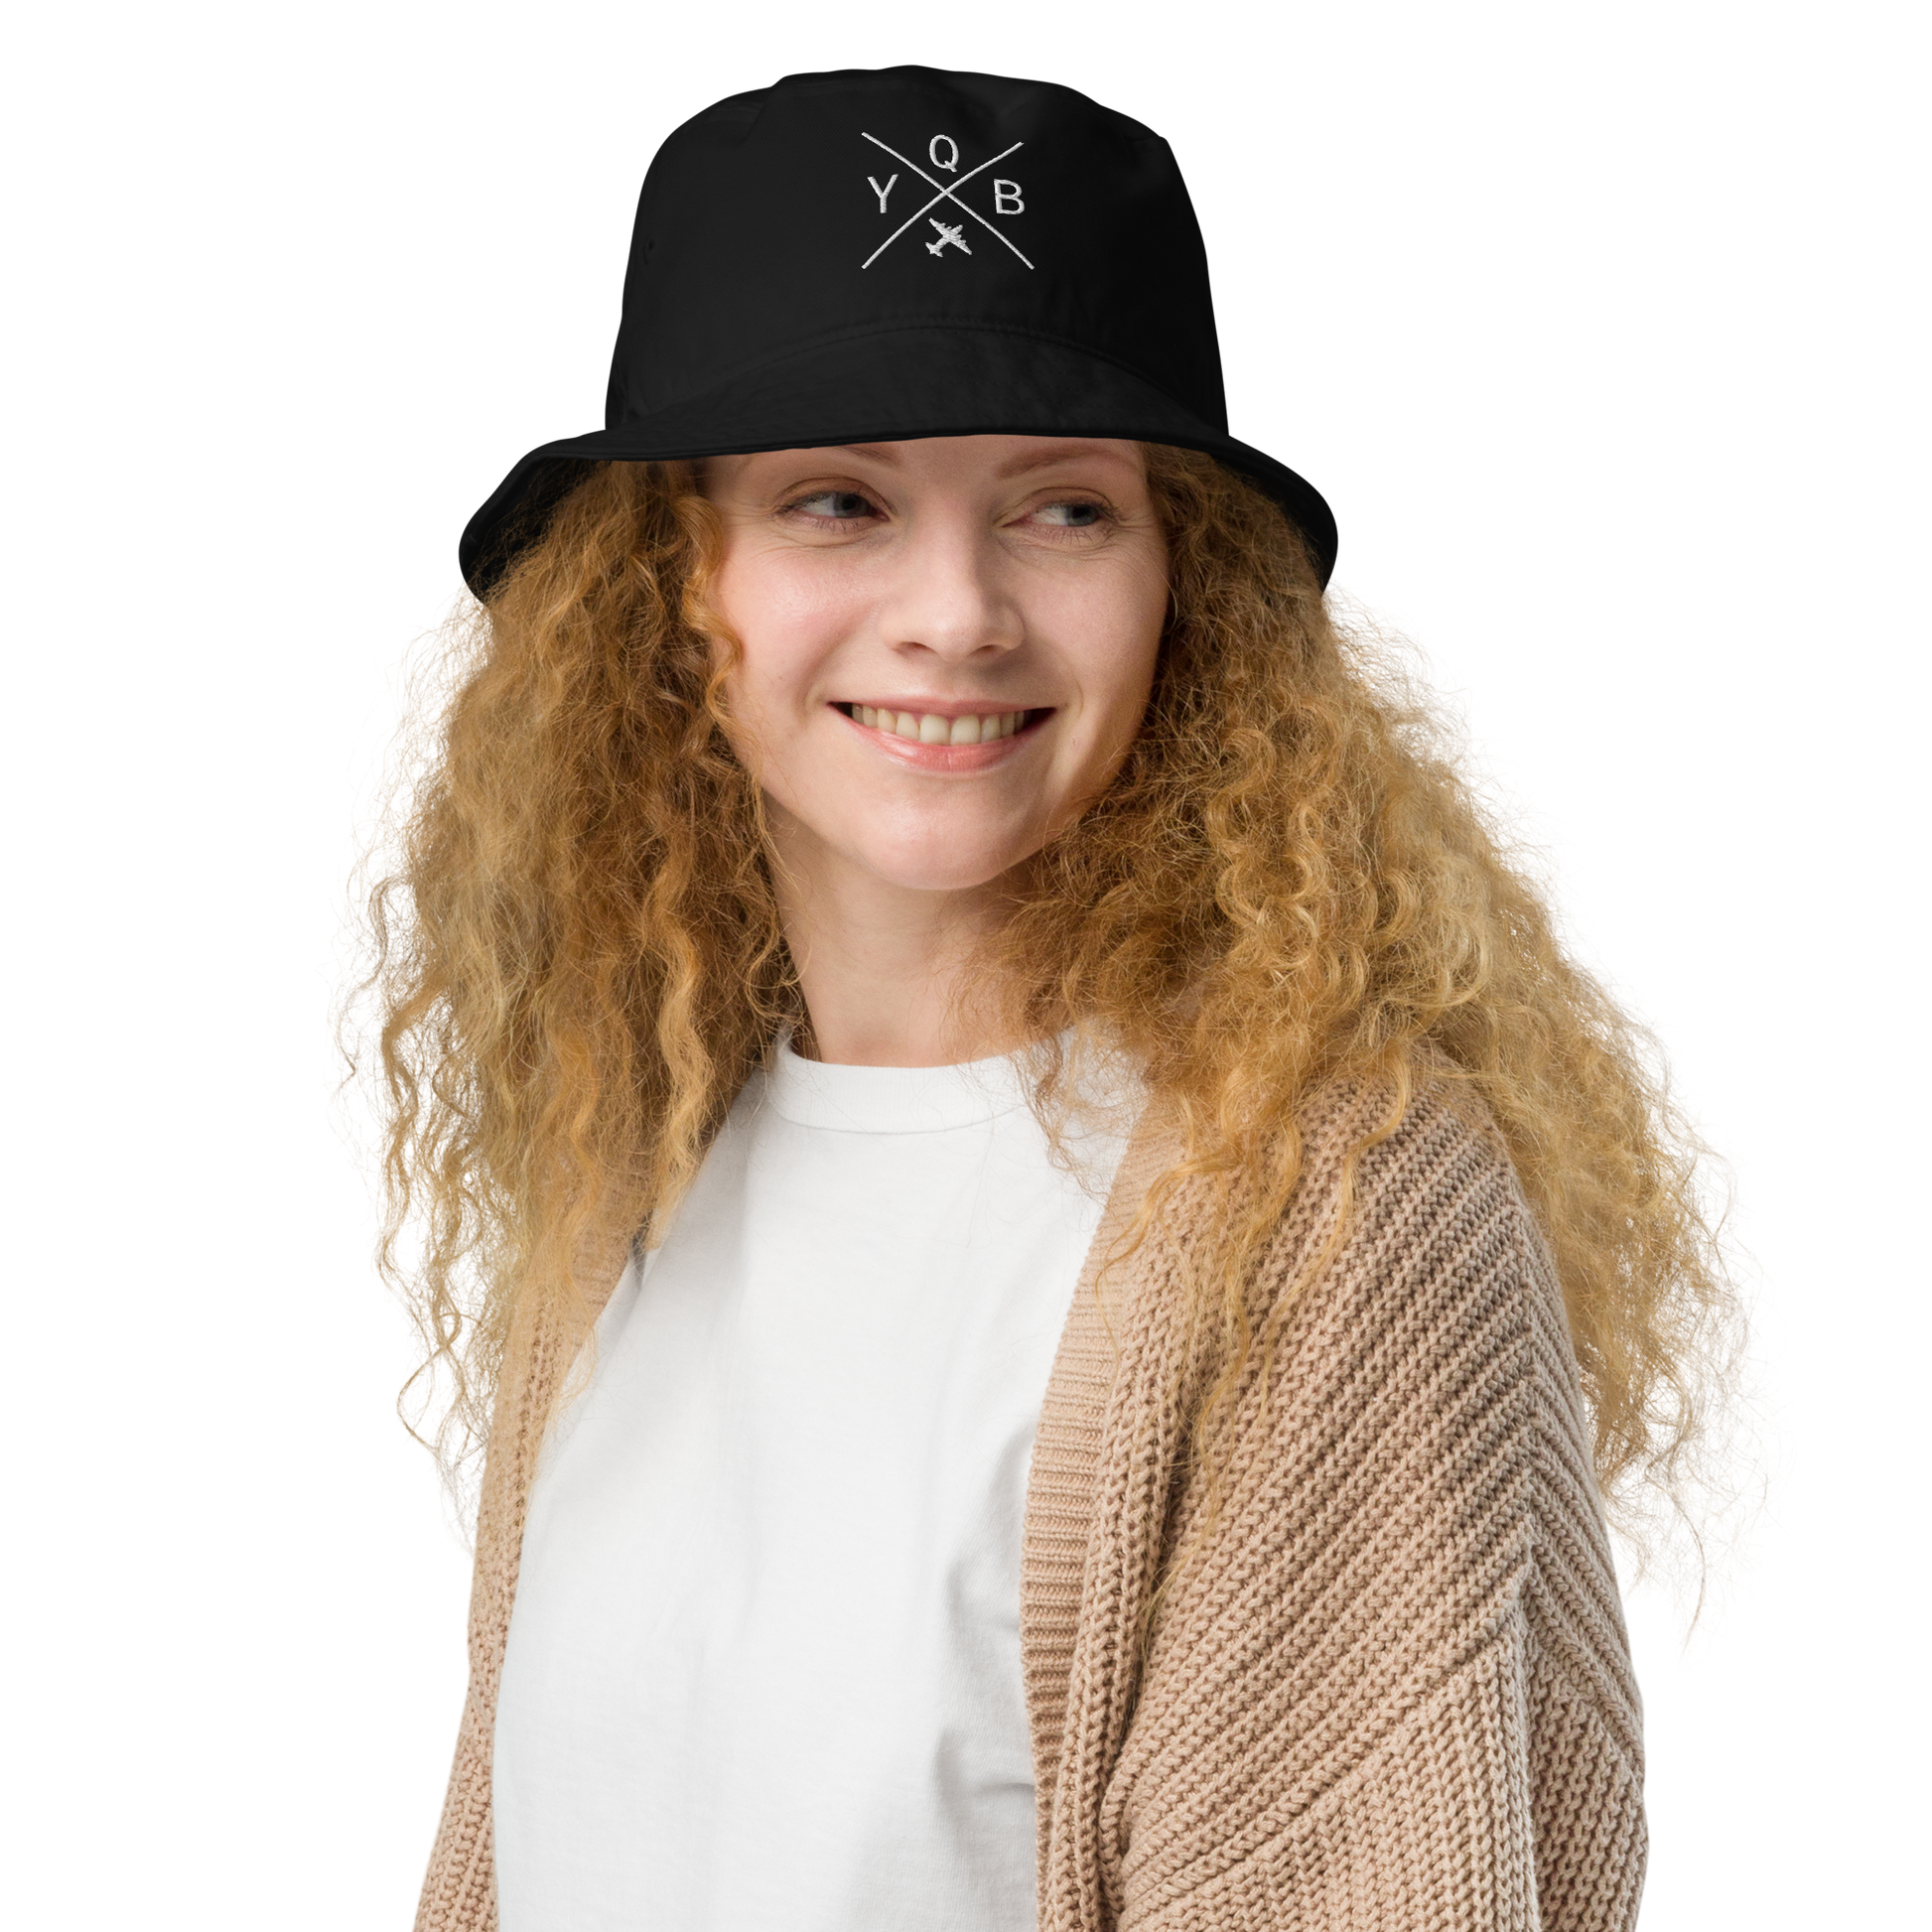 YHM Designs - YQB Quebec City Organic Cotton Bucket Hat - Crossed-X Design with Airport Code and Vintage Propliner - White Embroidery - Image 04